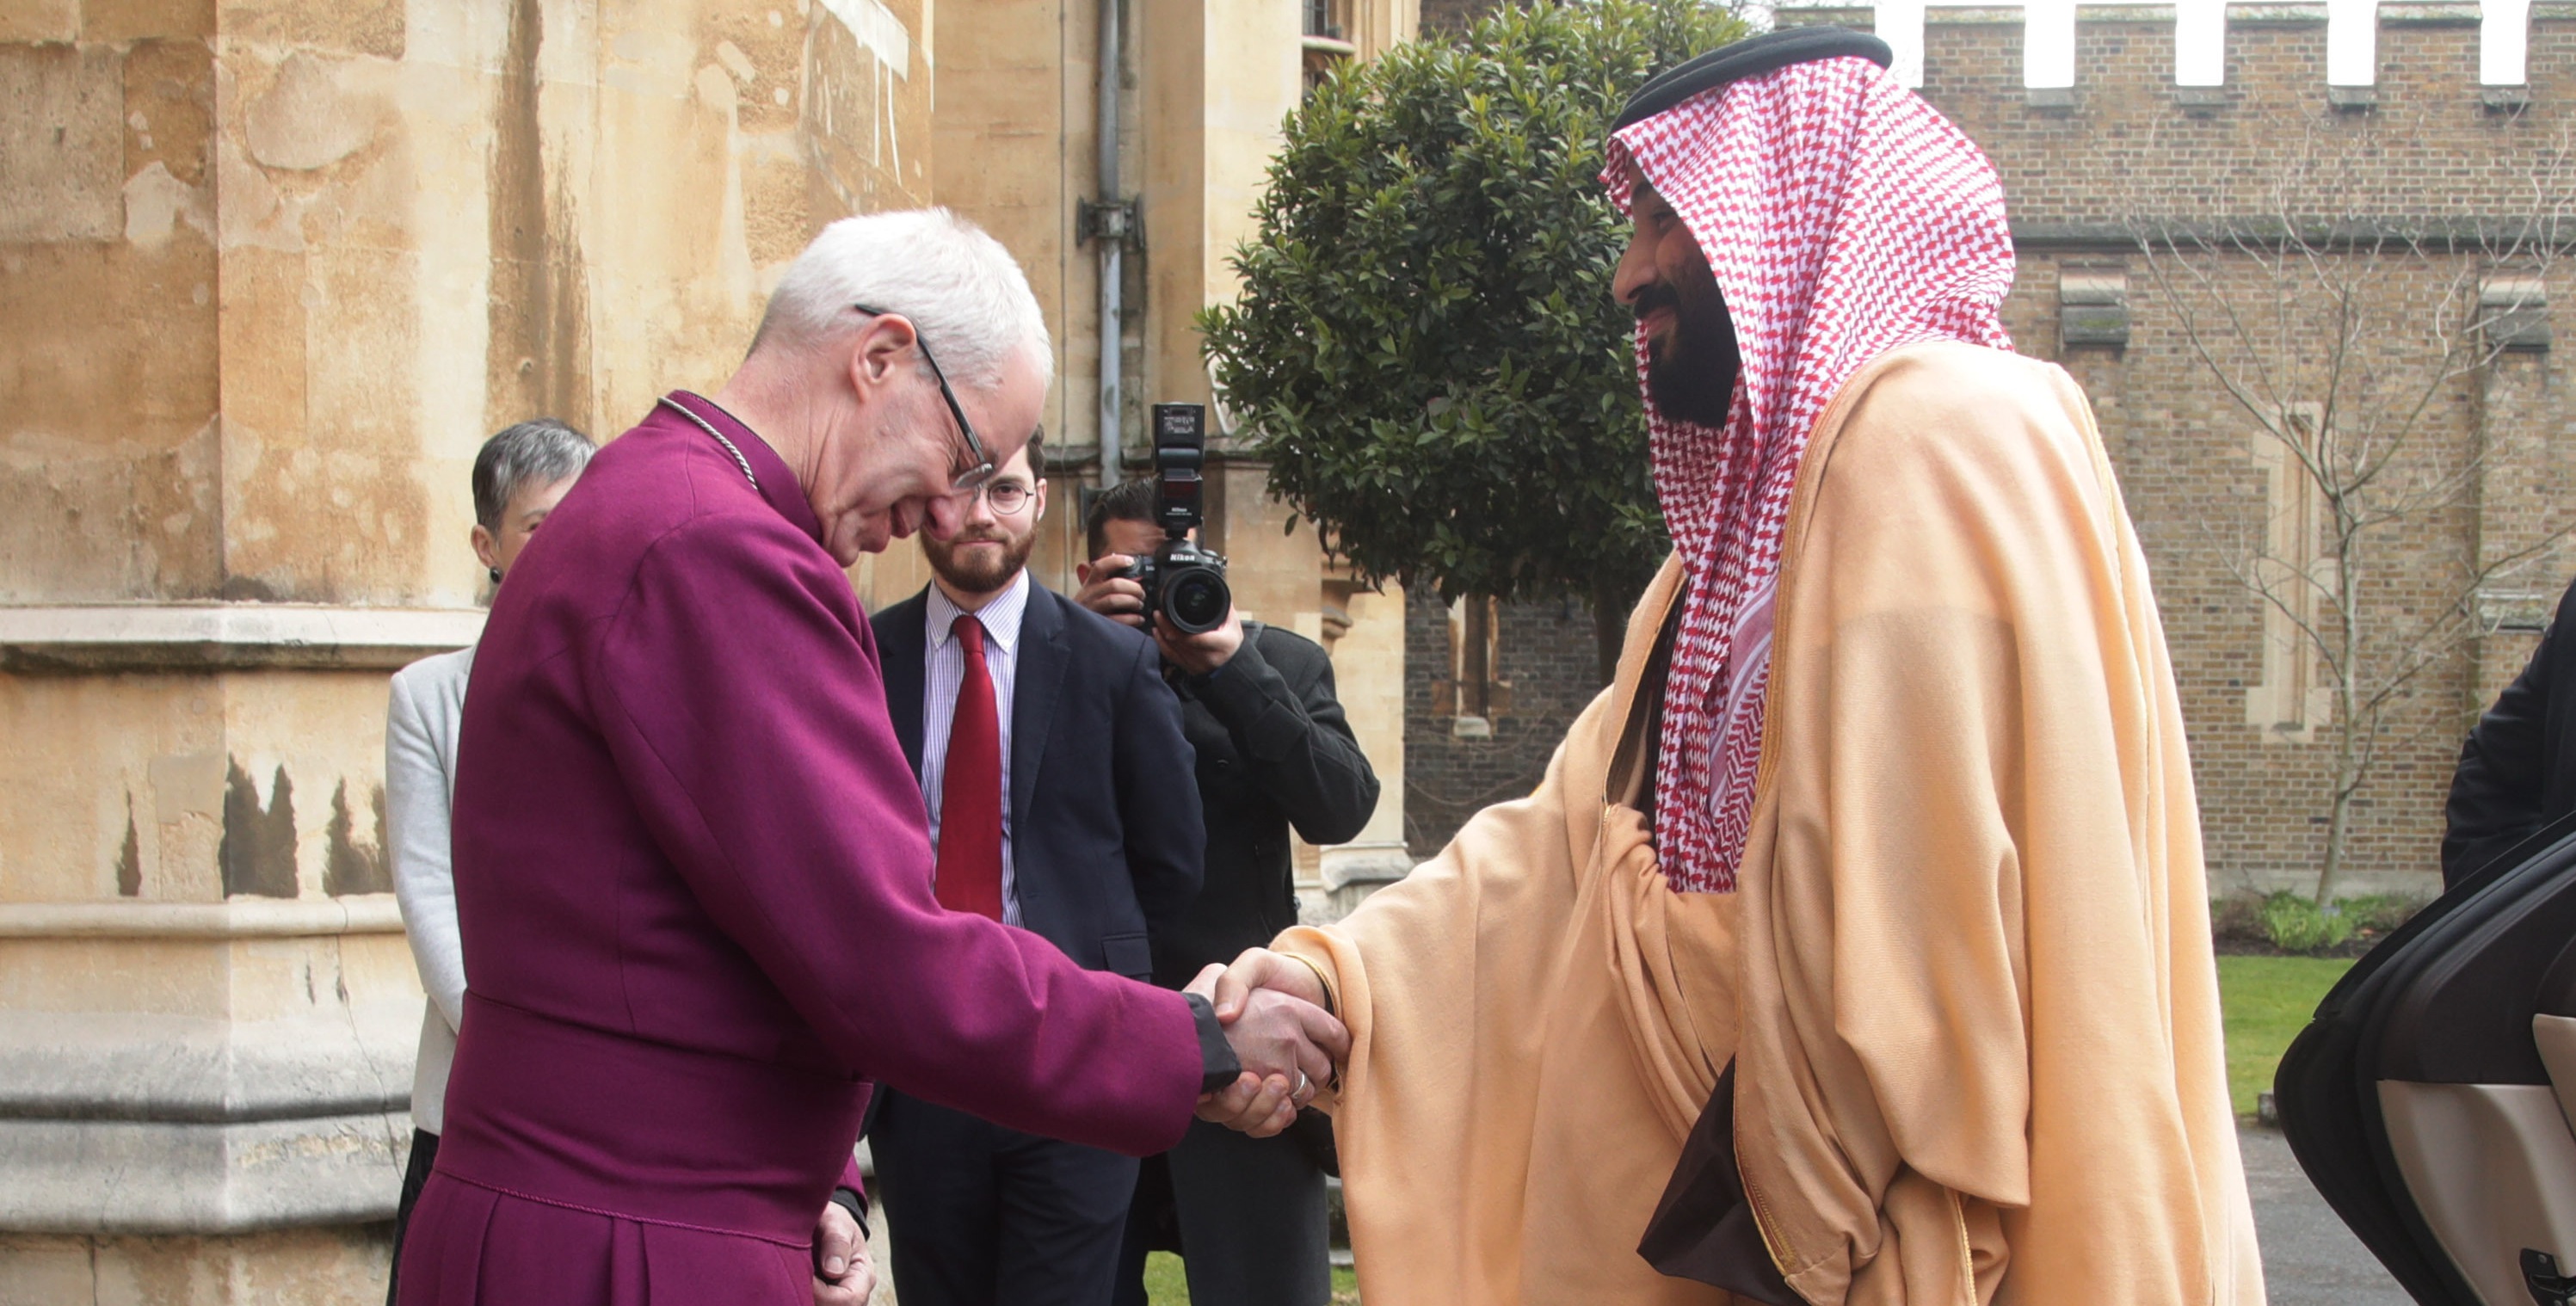 The Crown Prince of Saudi Arabia, HRH Mohammed bin Salman, arrives for a private meeting at Lambeth Palace hosted by the Archbishop of Canterbury Justin Welby on March 8, 2018 in London, United Kingdom